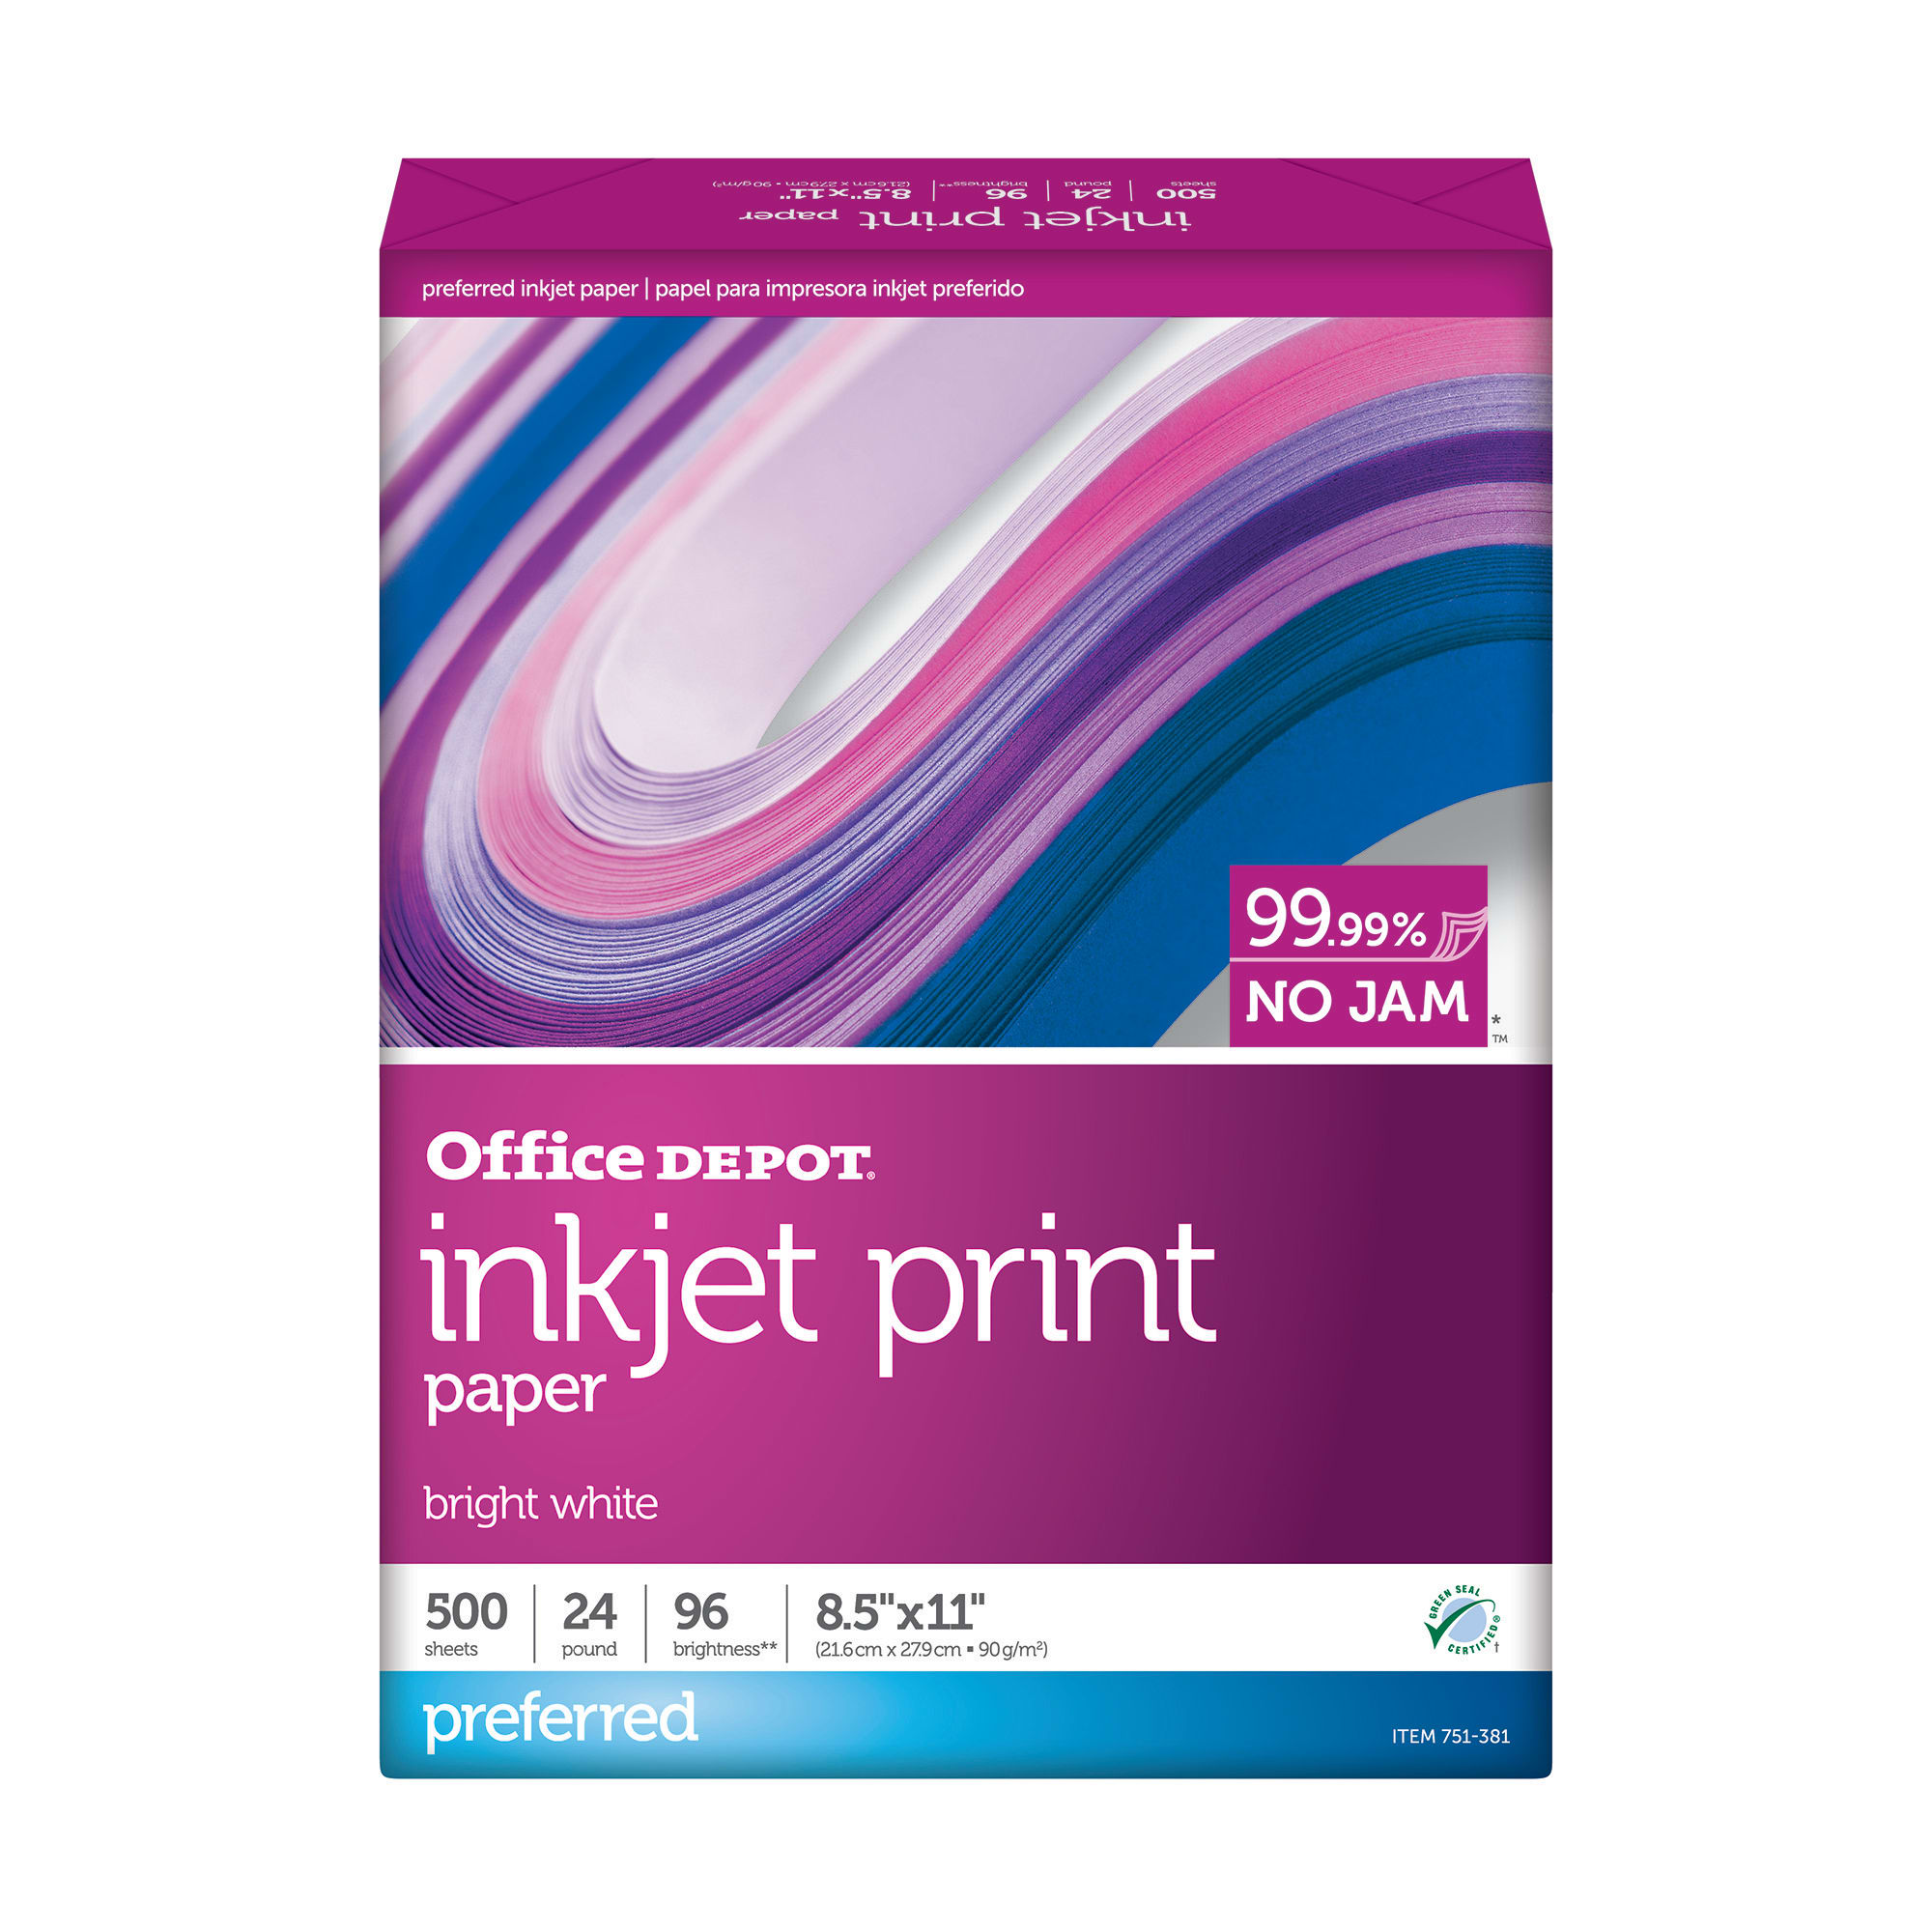 Copy And Printer Paper - Office Depot